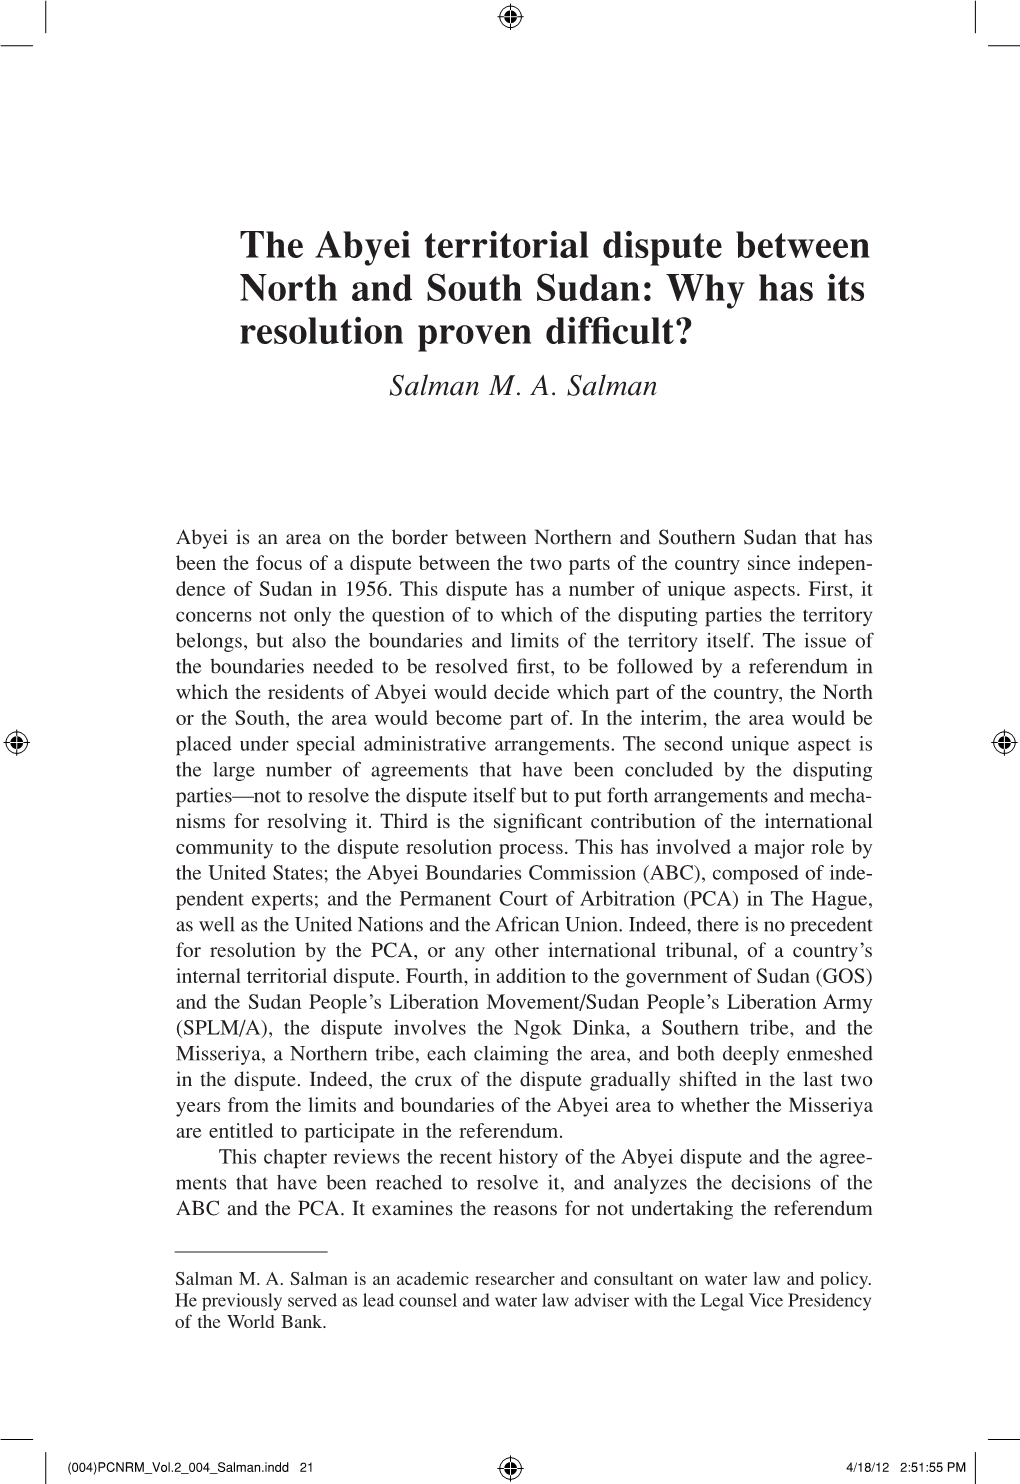 The Abyei Territorial Dispute Between North and South Sudan: Why Has Its Resolution Proven Difficult? Salman M